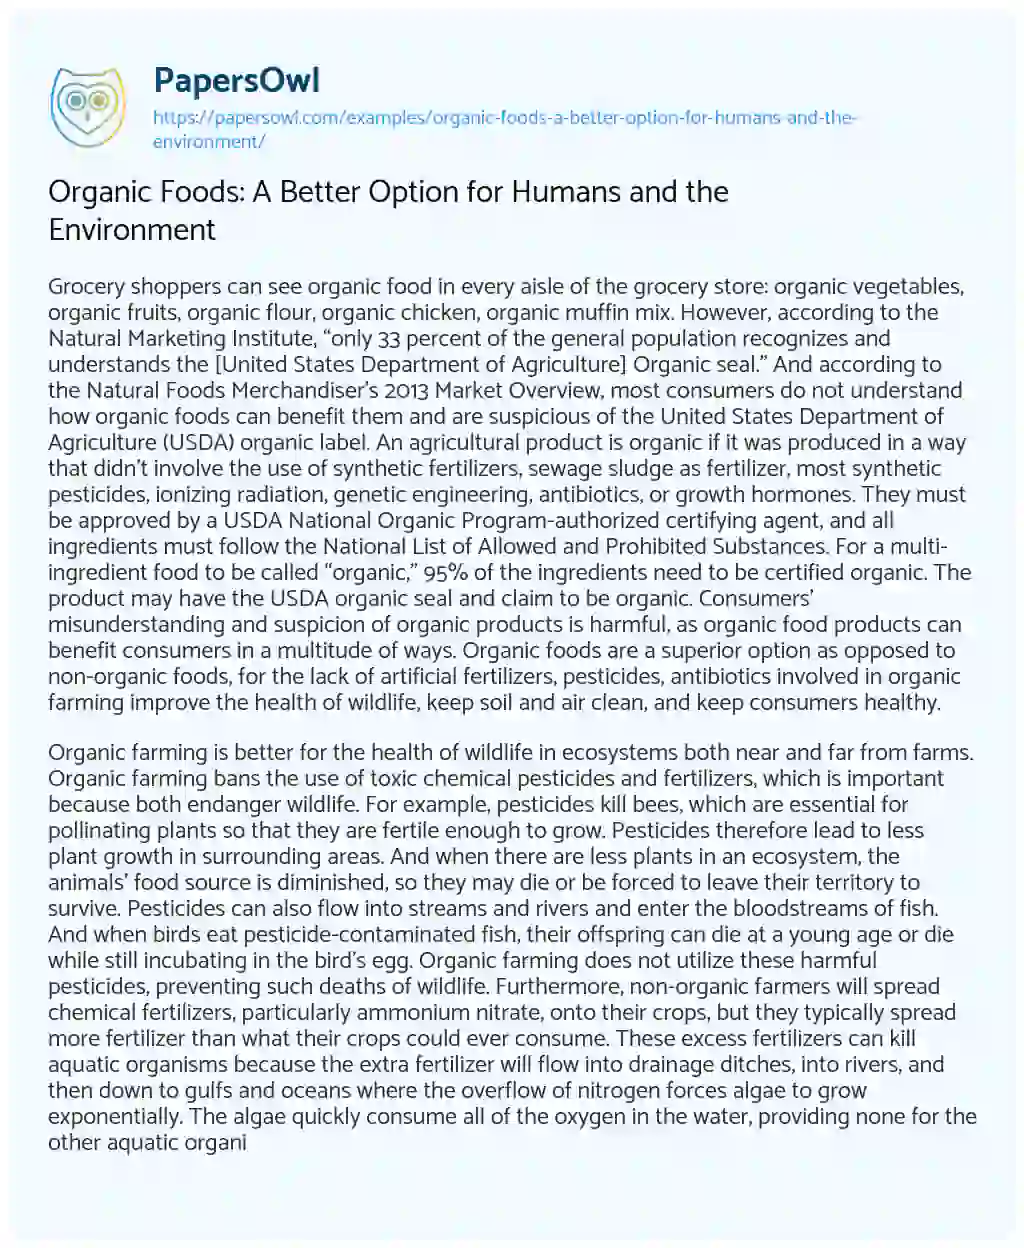 Essay on Organic Foods: a Better Option for Humans and the Environment 